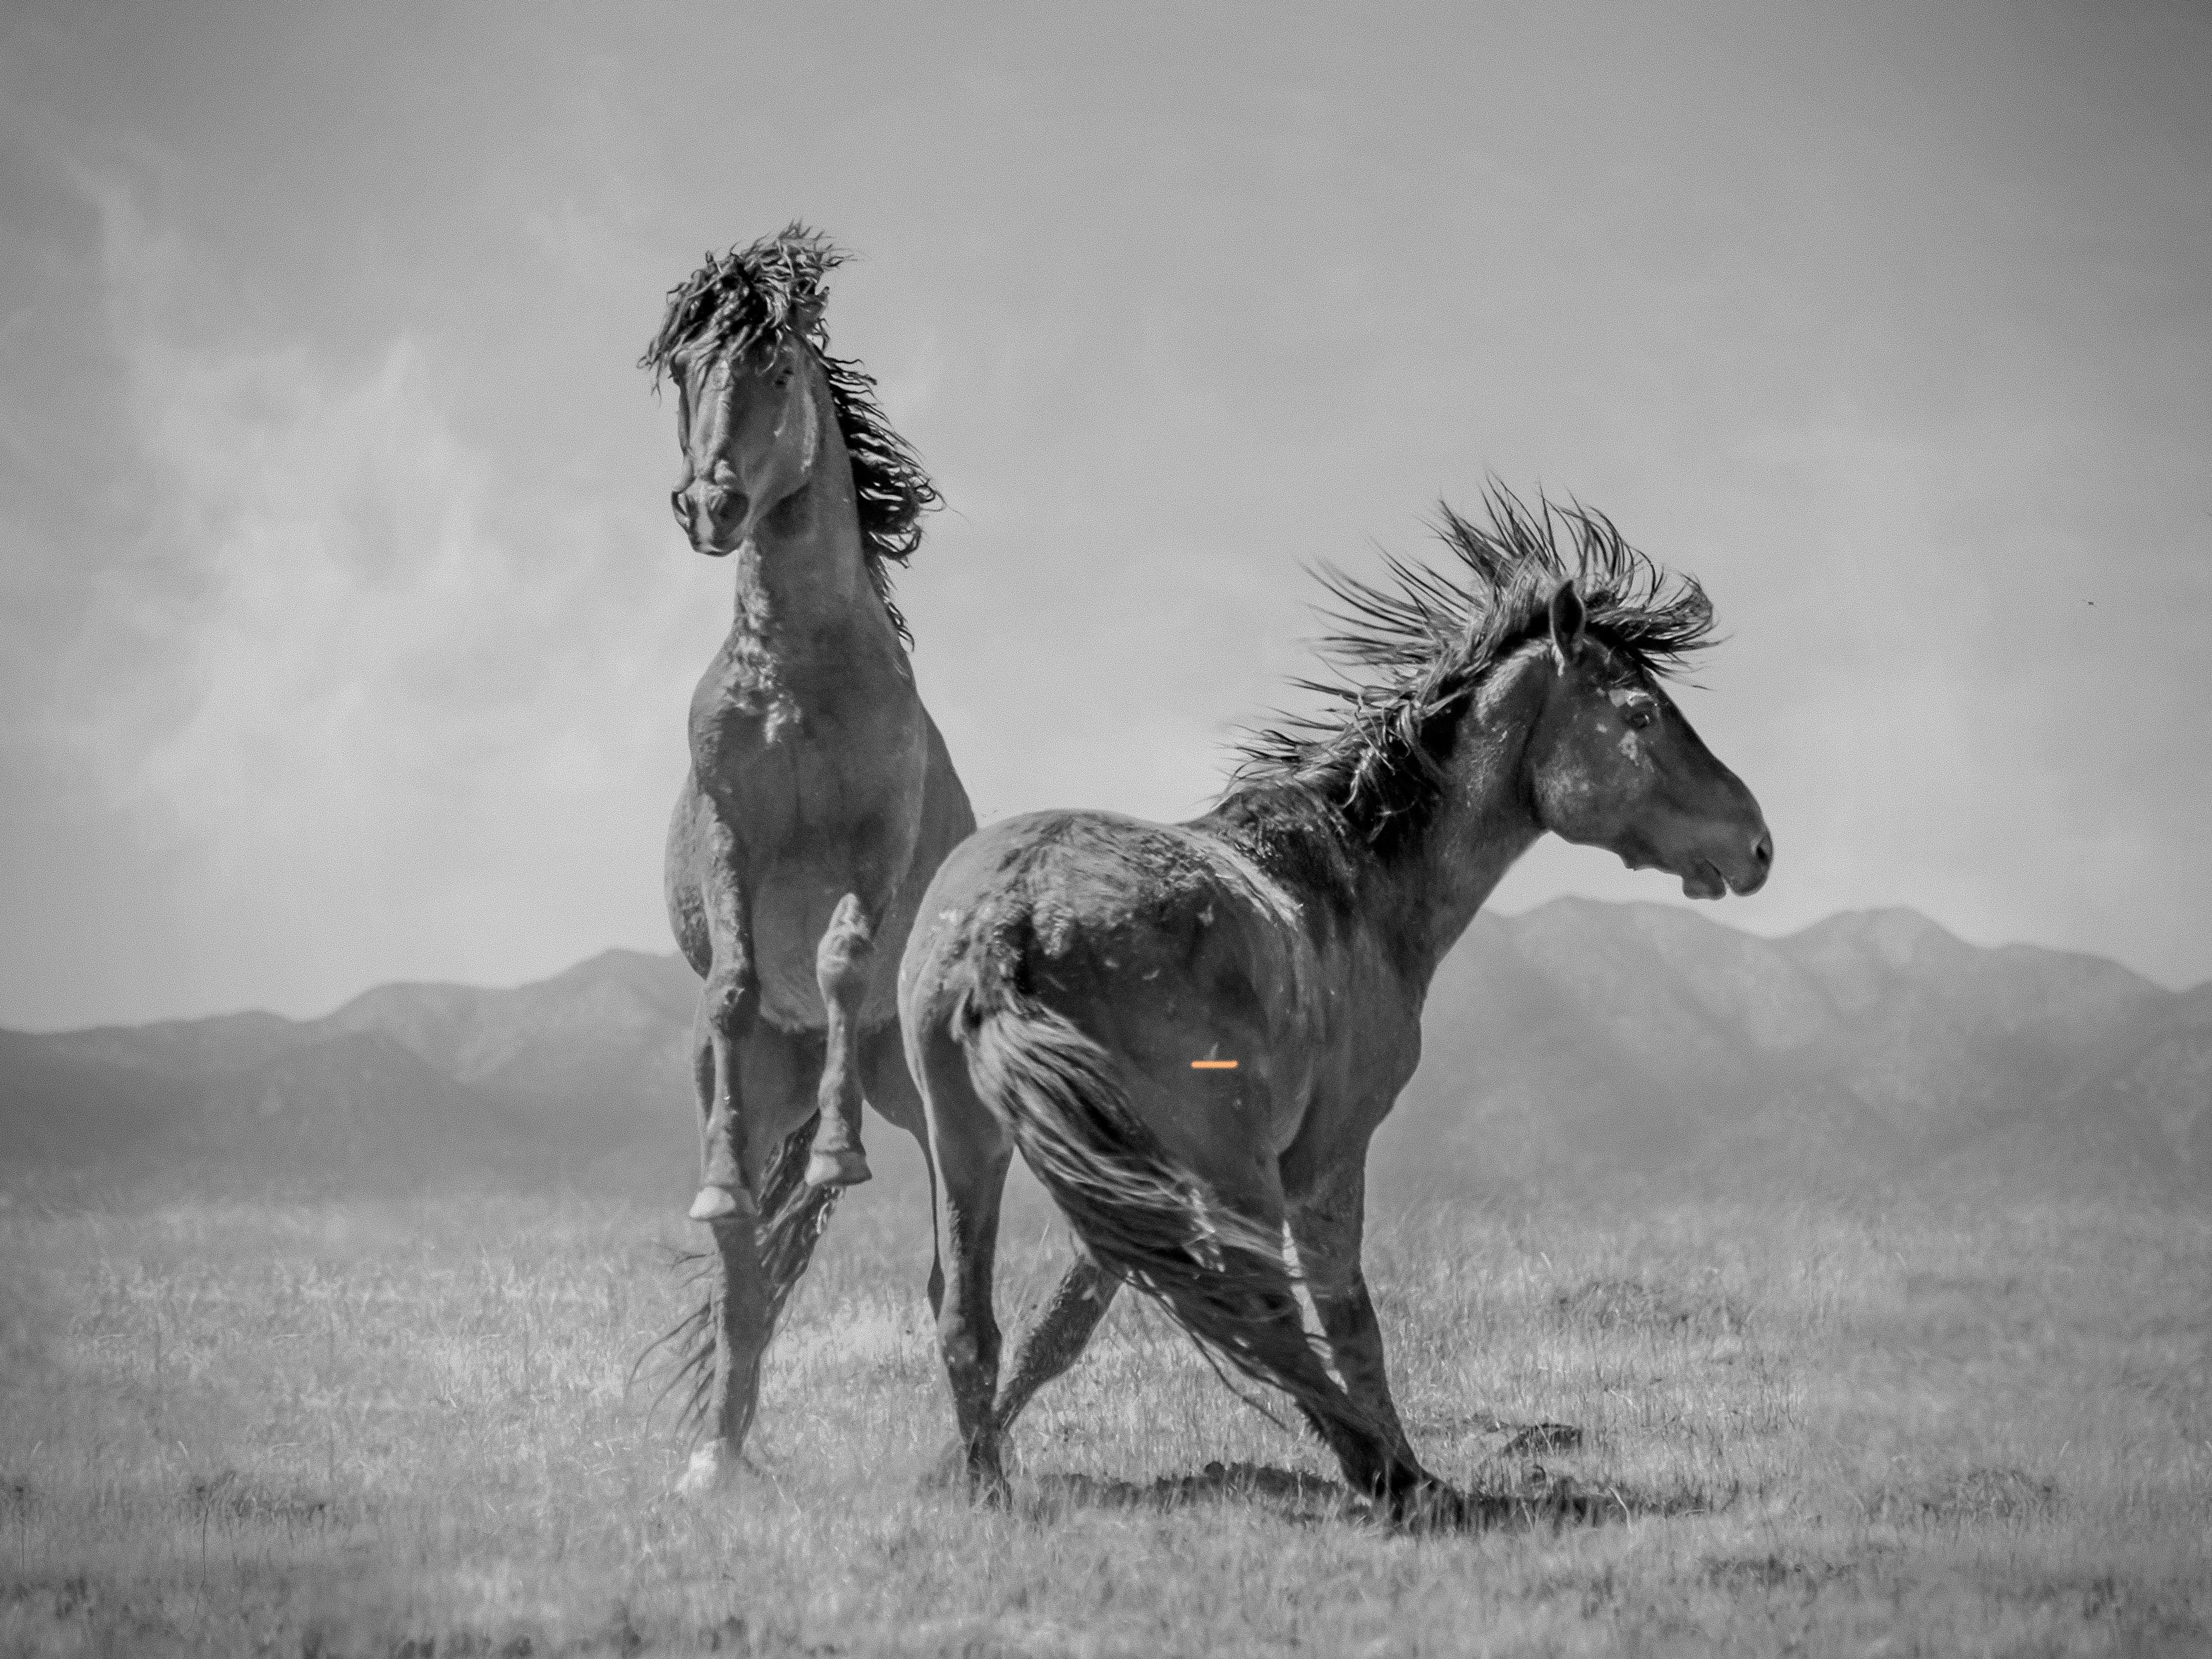 Shane Russeck Black and White Photograph - "Wonder Horses" 40x50 - Black & White Photography, Wild Horses Mustangs Unsigned